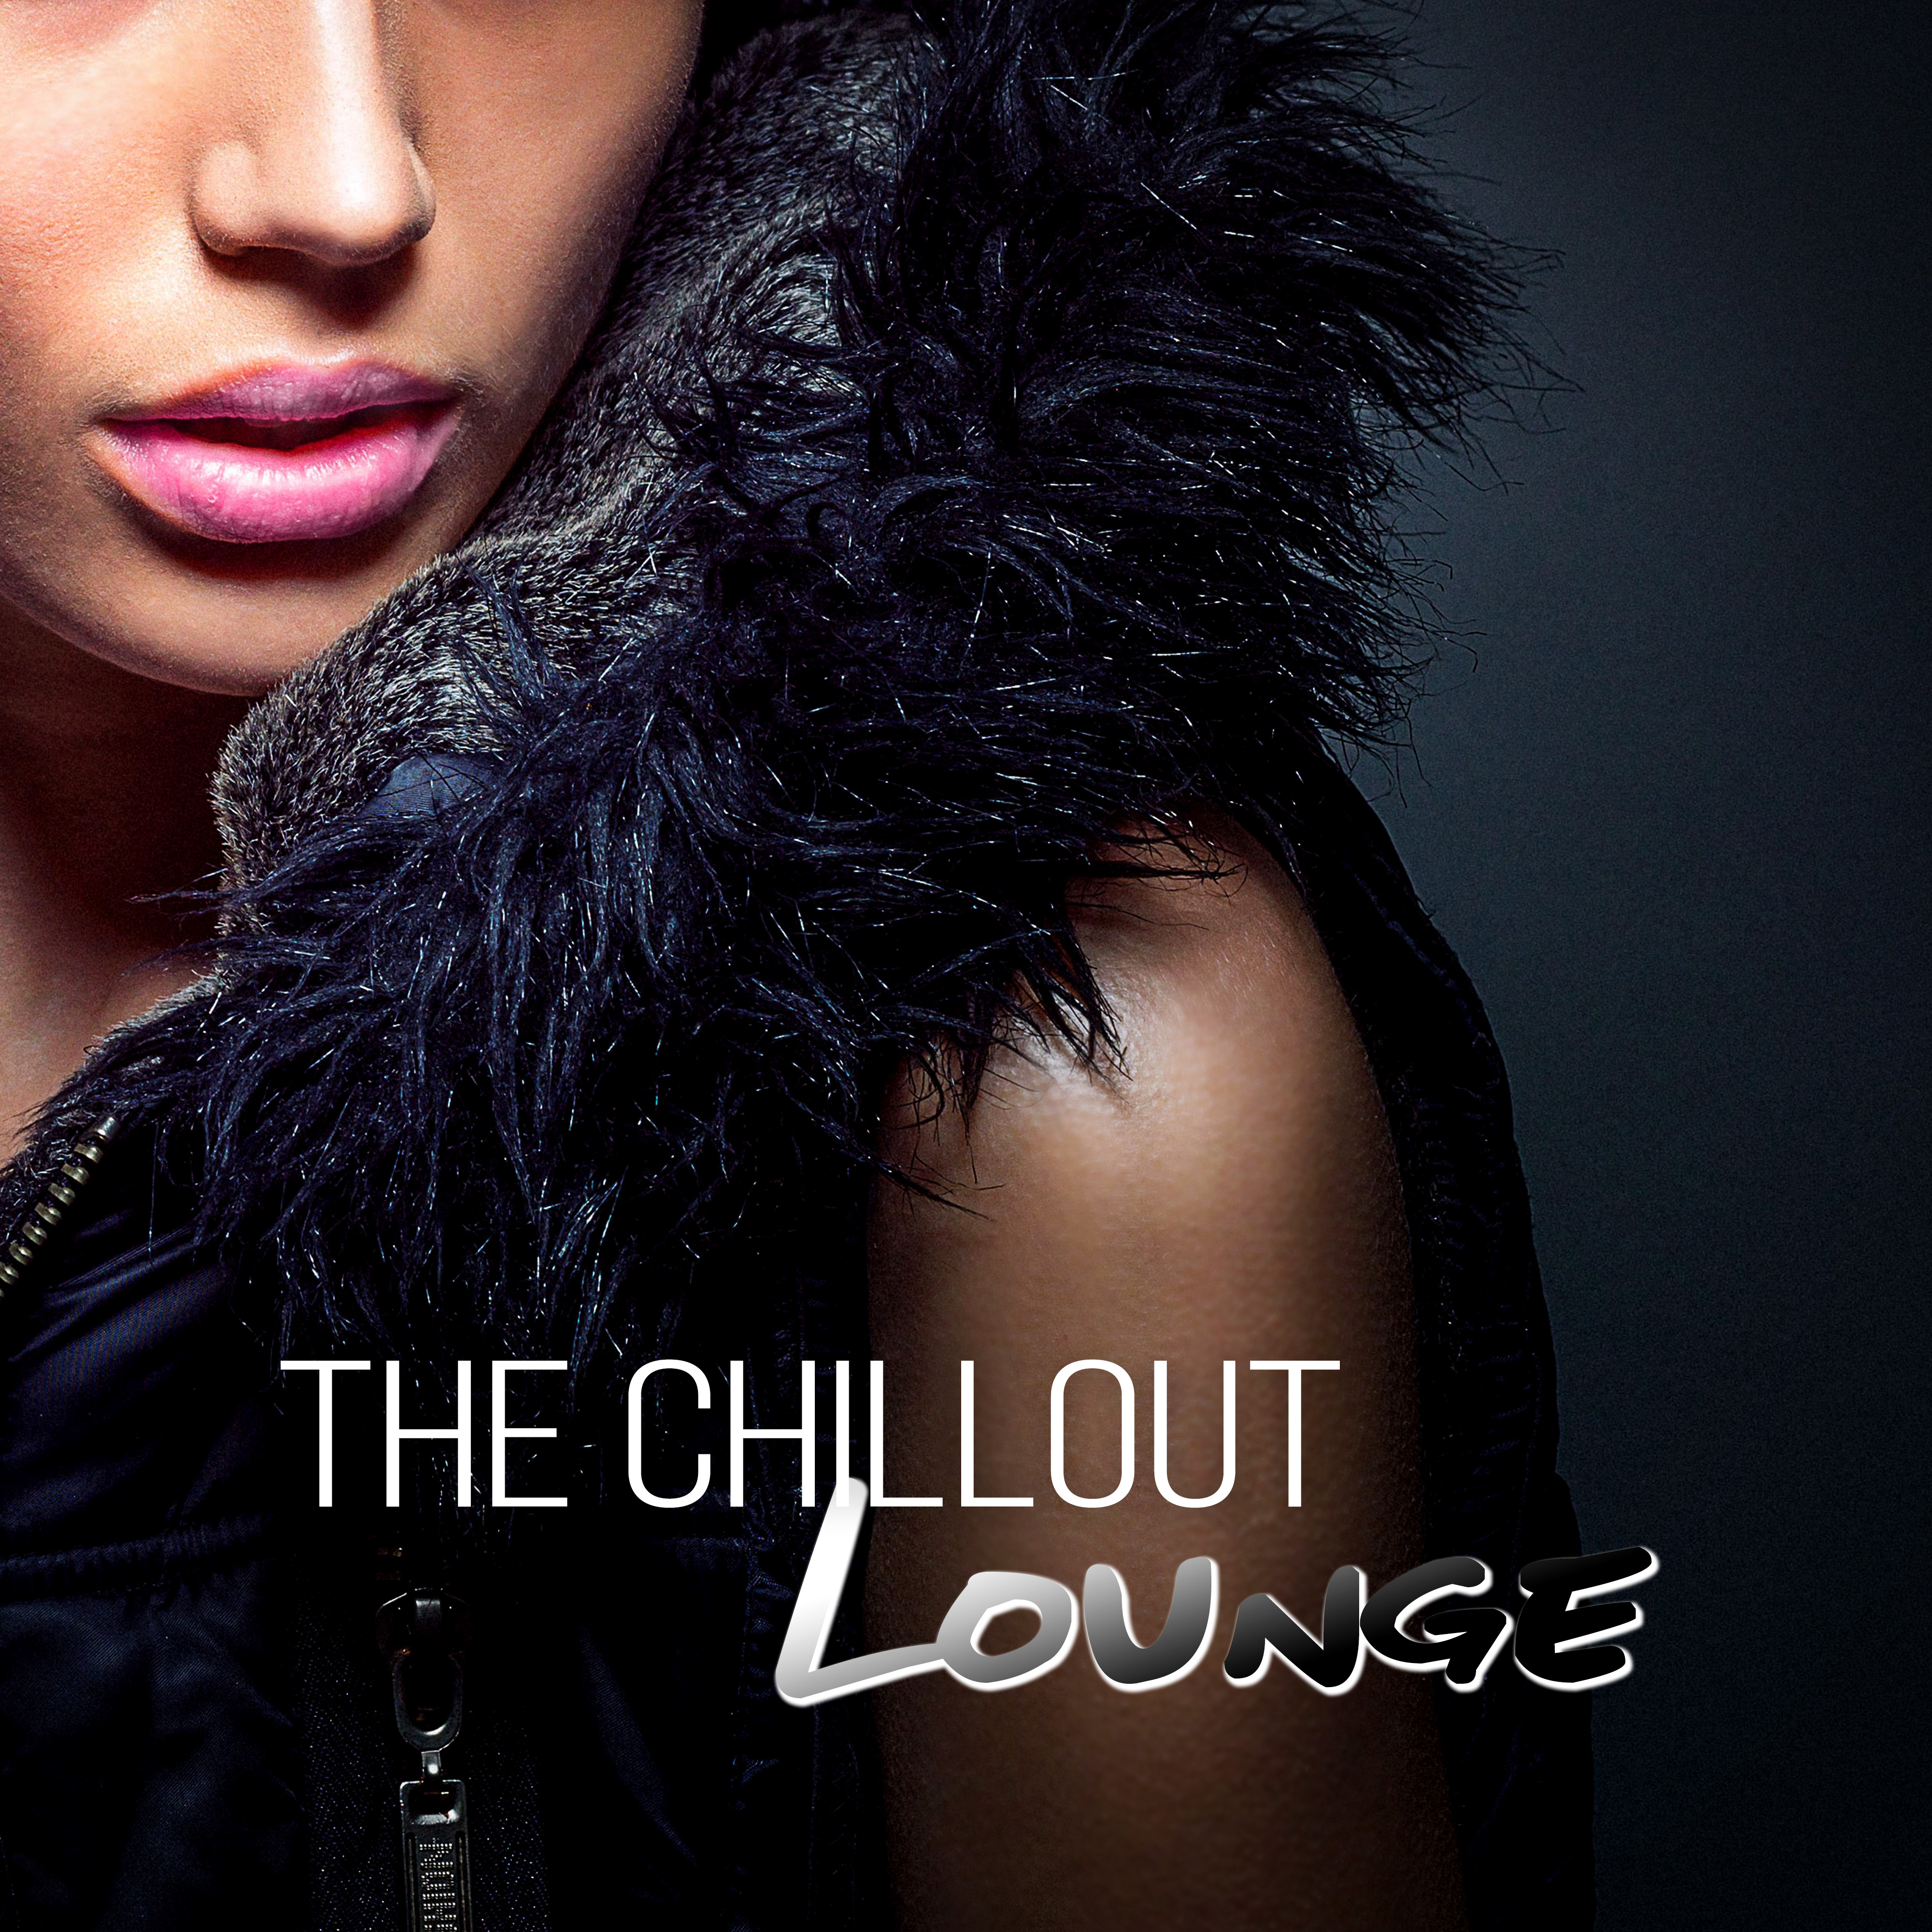 The Chillout Lounge